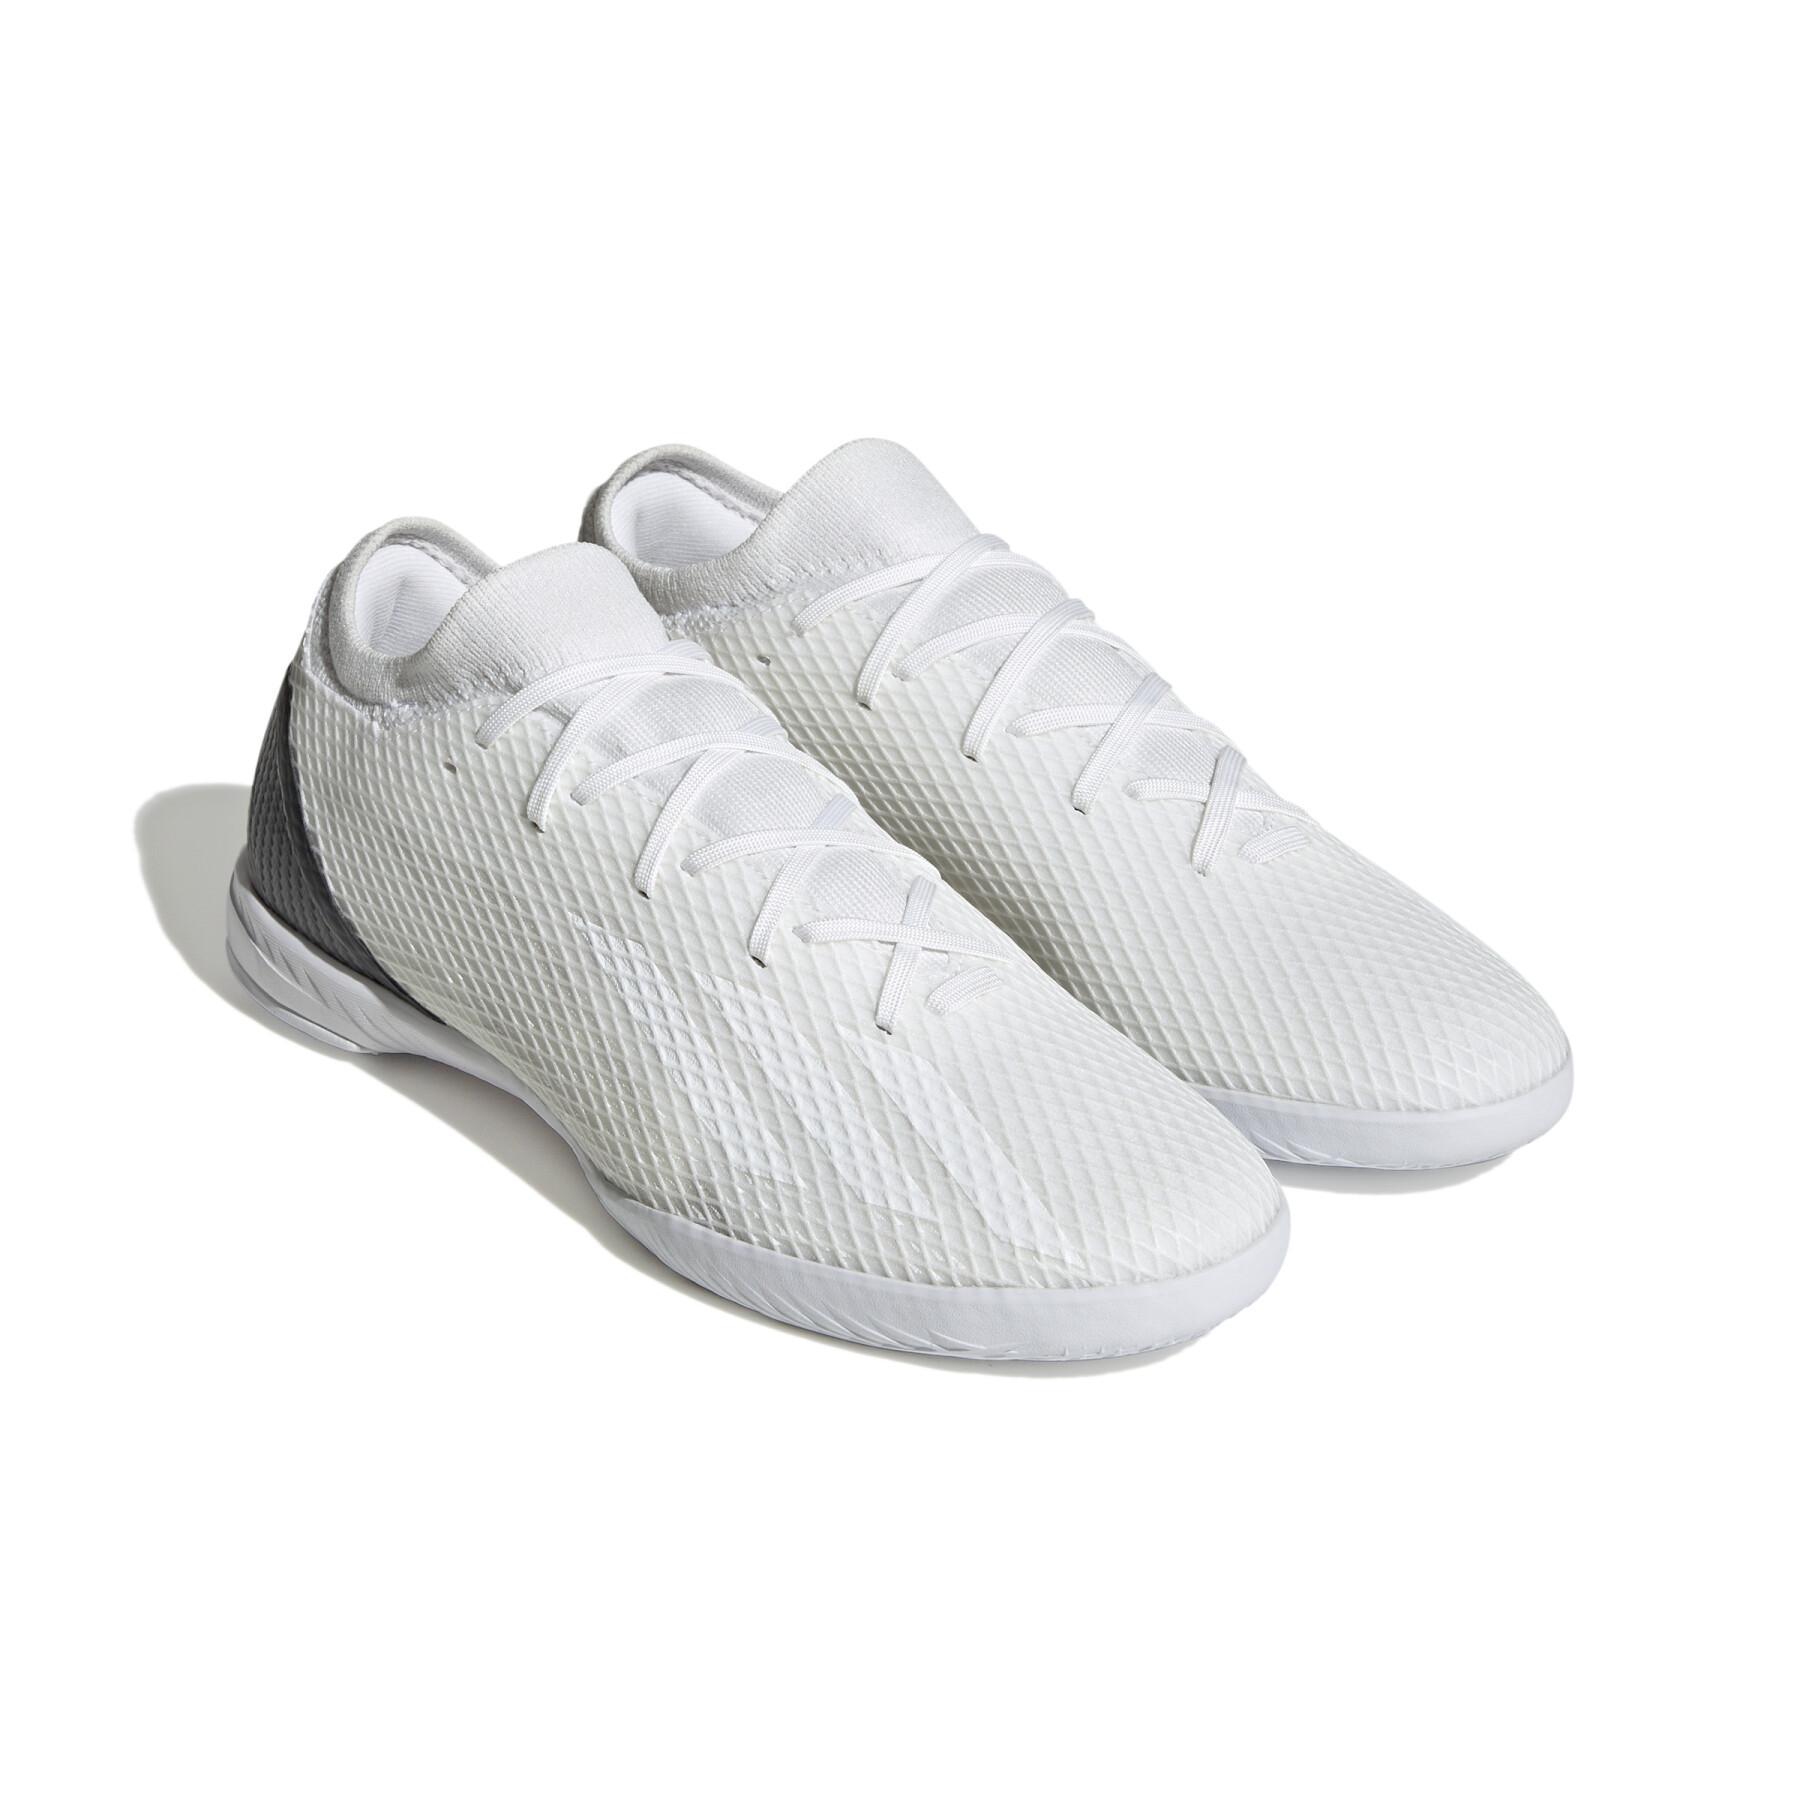 Indoor soccer shoes adidas X Speedportal.3 - Pearlized Pack